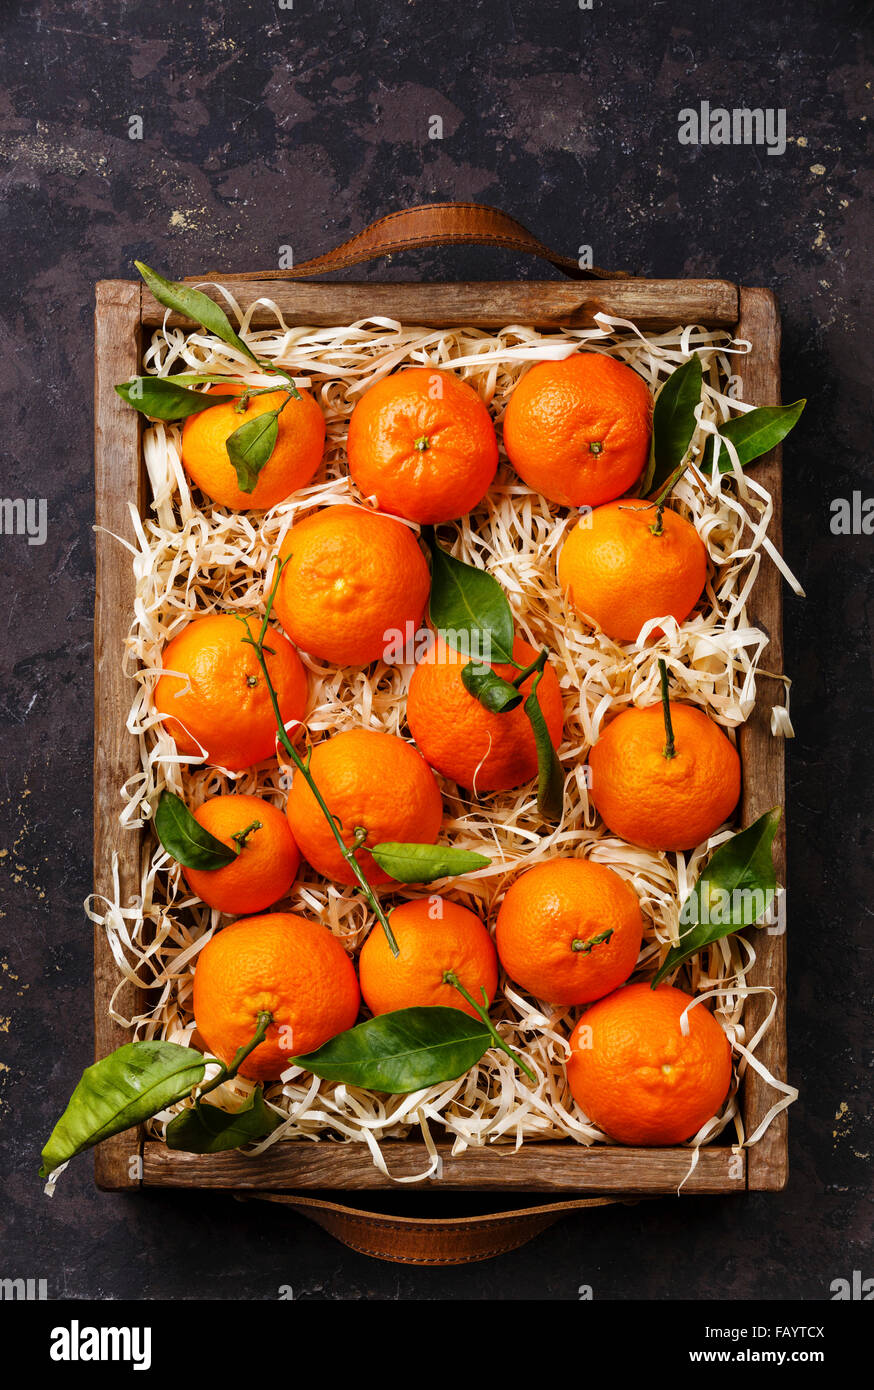 Tangerines with leaves in wooden box on black background Stock Photo